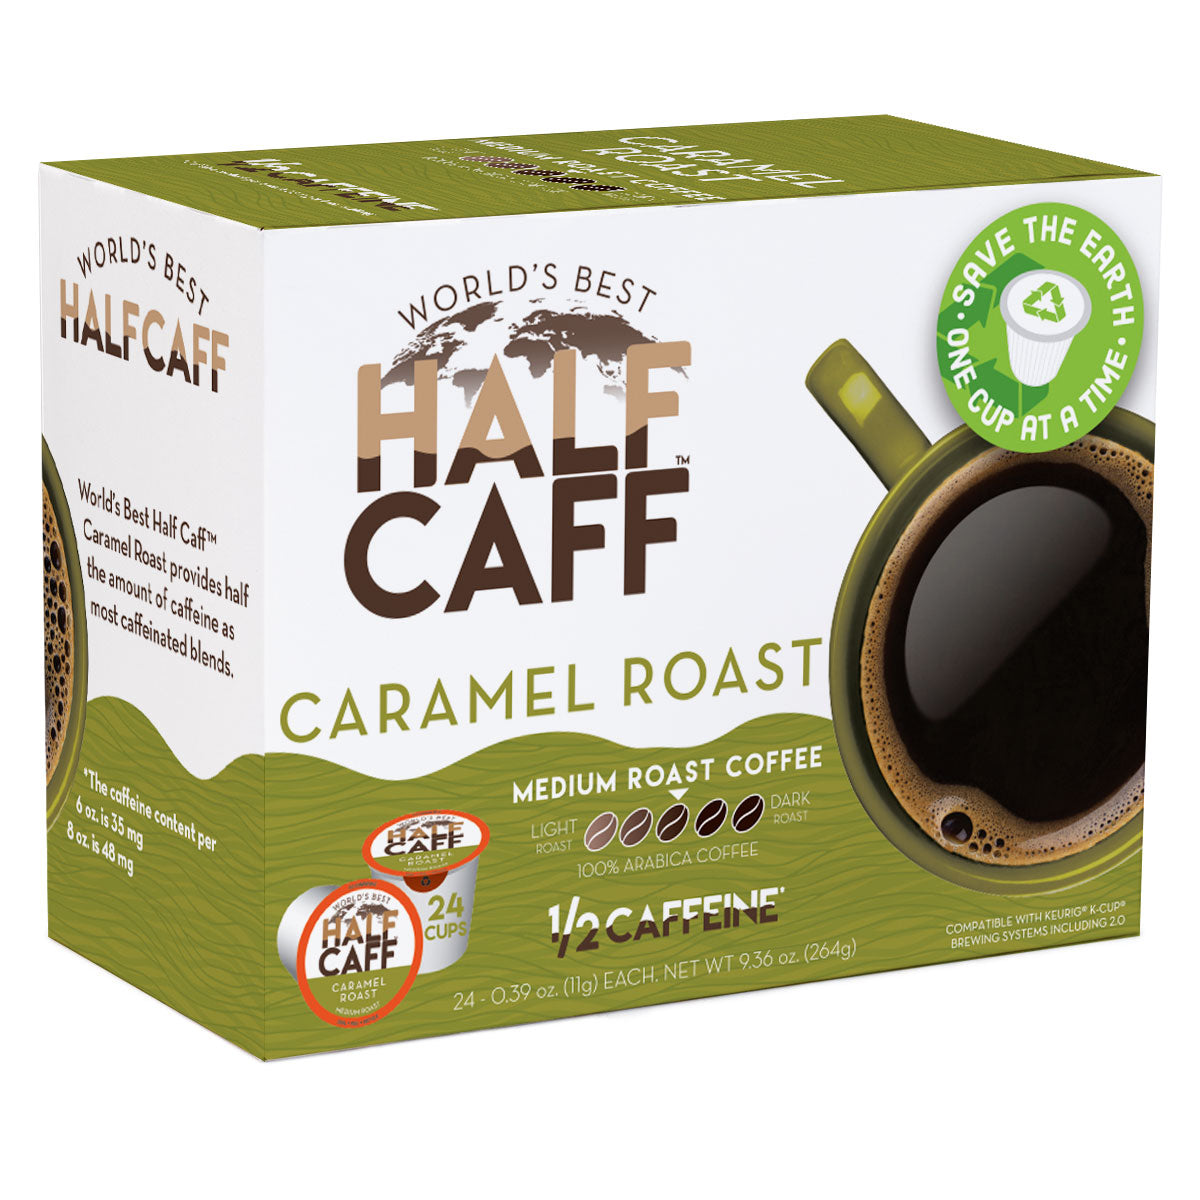 Image of World's Best Half Caff Caramel Roast Flavored Coffee Pods - 24ct